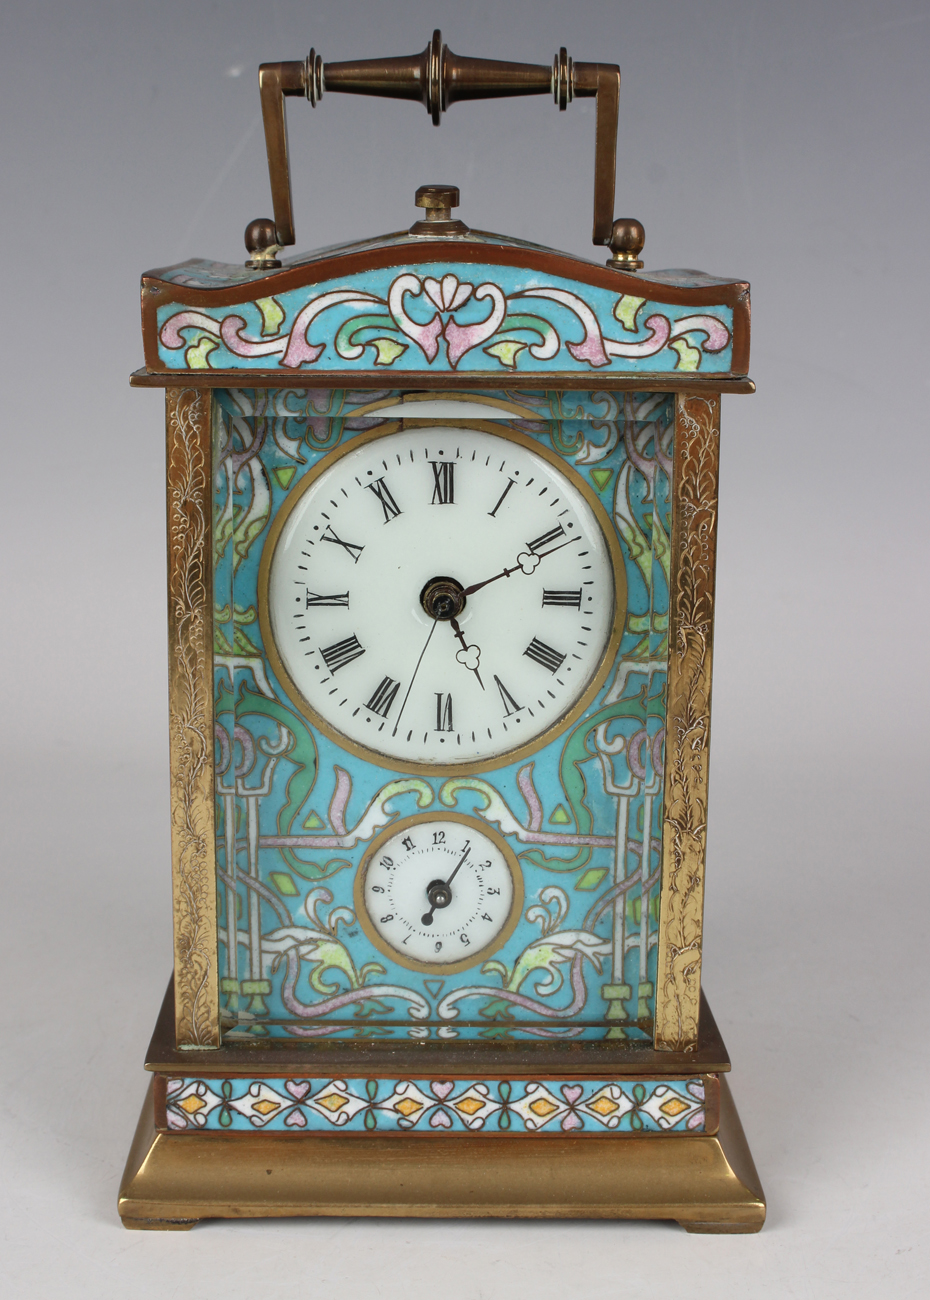 A 20th century Chinese cloisonné and brass cased carriage alarm clock, the movement striking hours